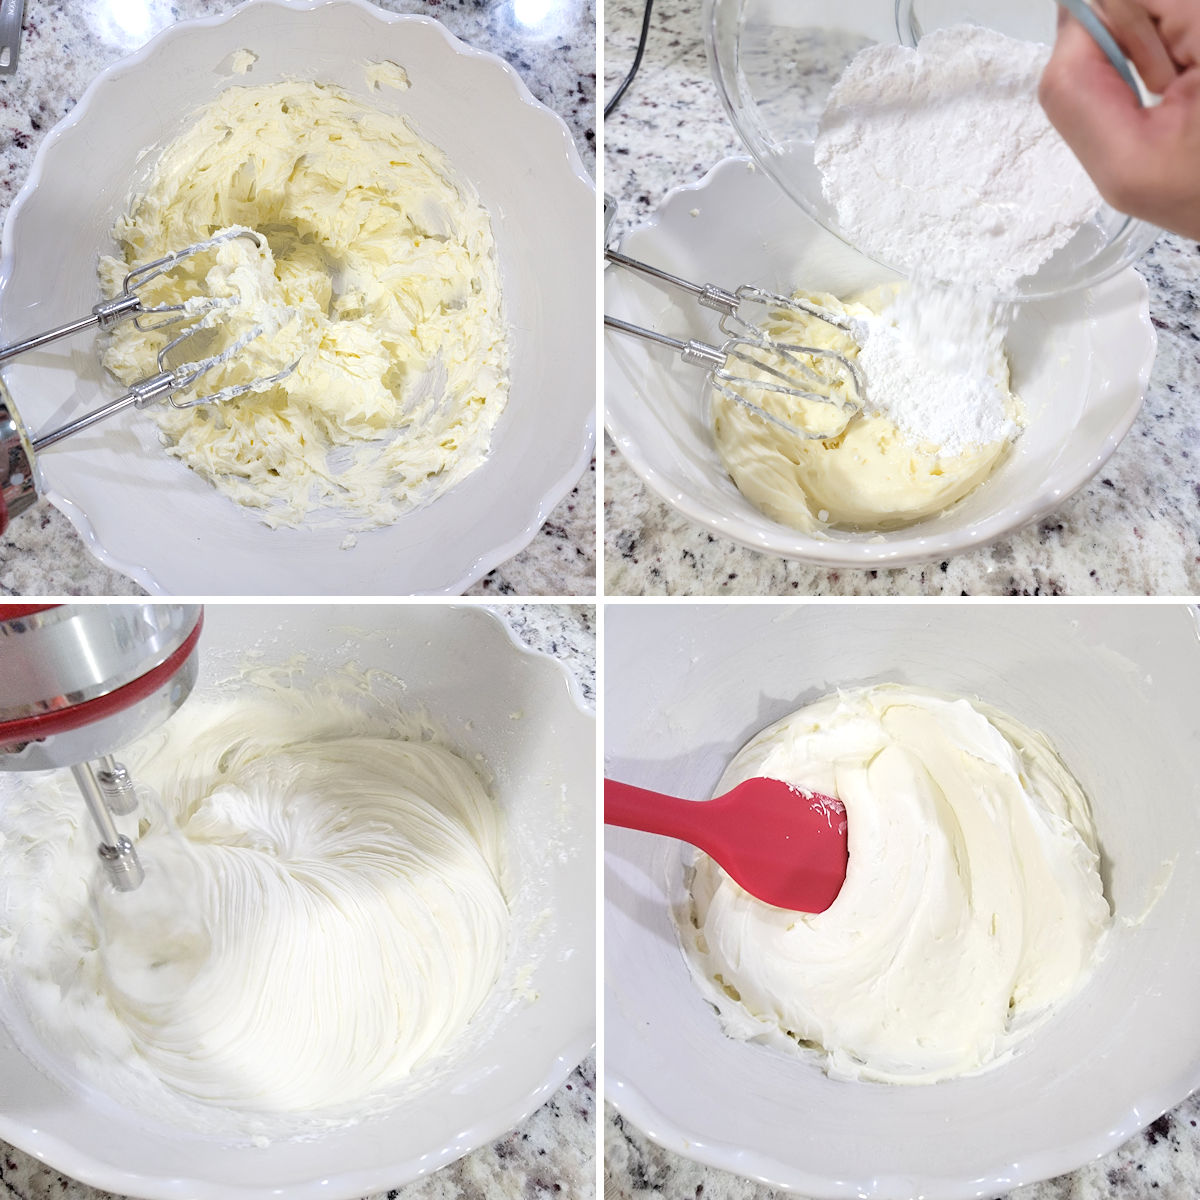 Mixing cream cheese frosting in a bowl with a hand mixer.